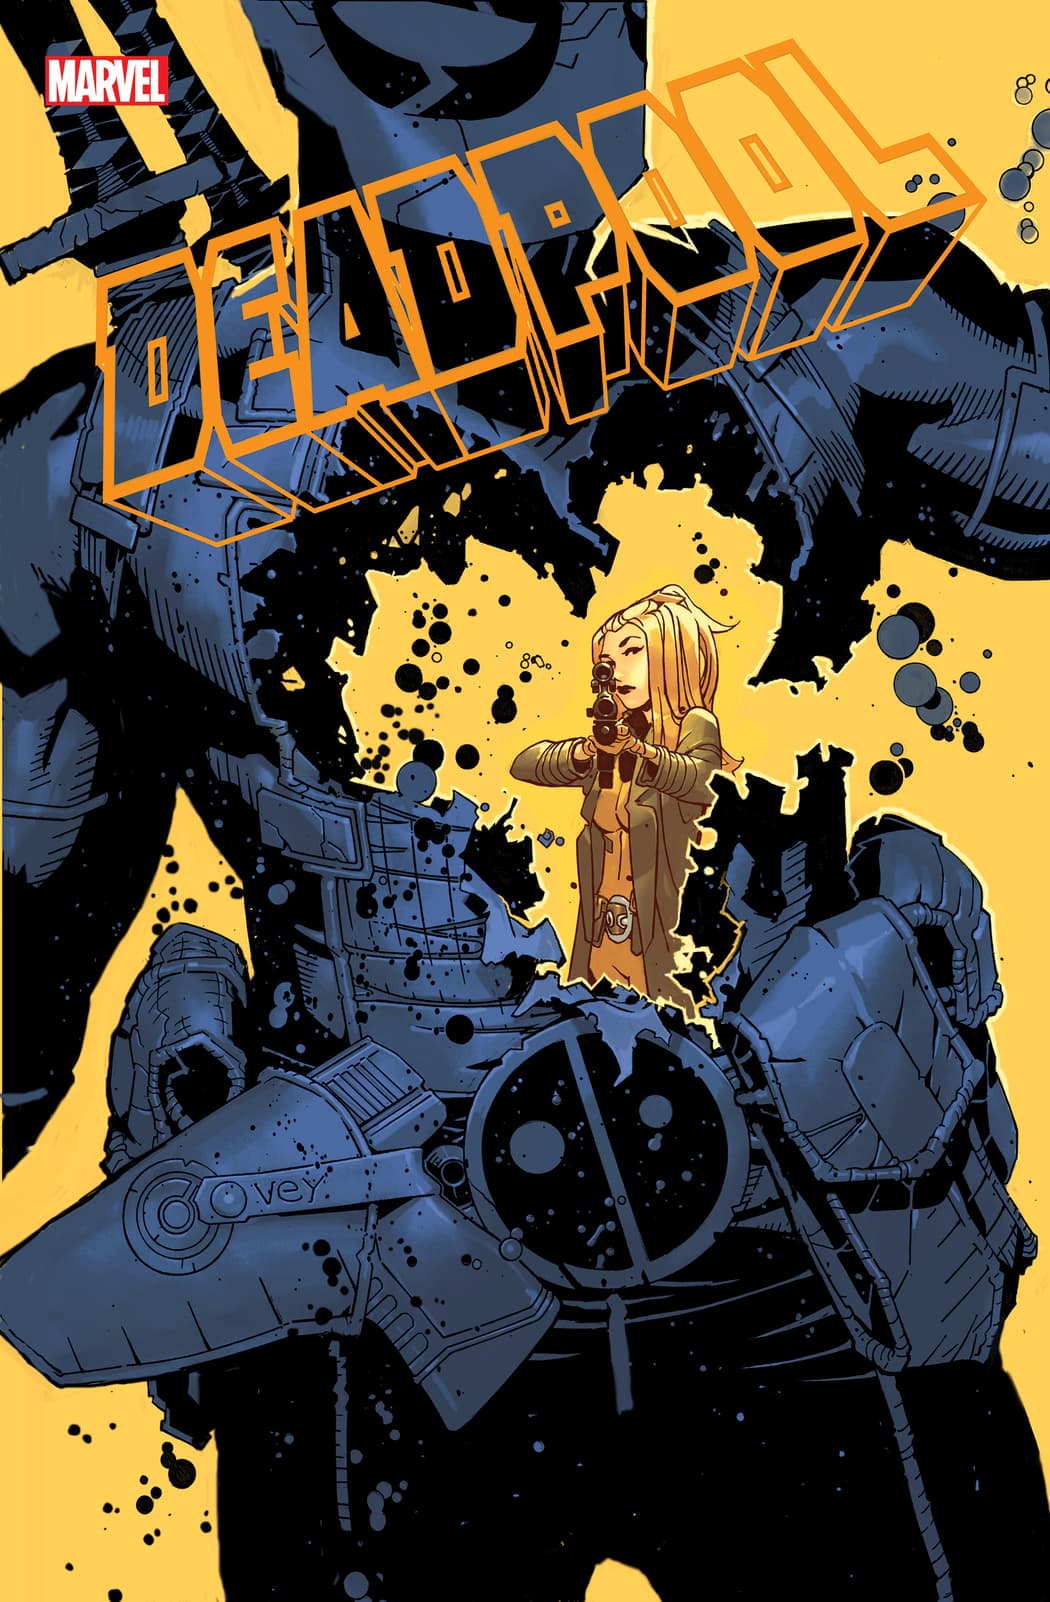 DEADPOOL #7 cover by Chris Bachalo